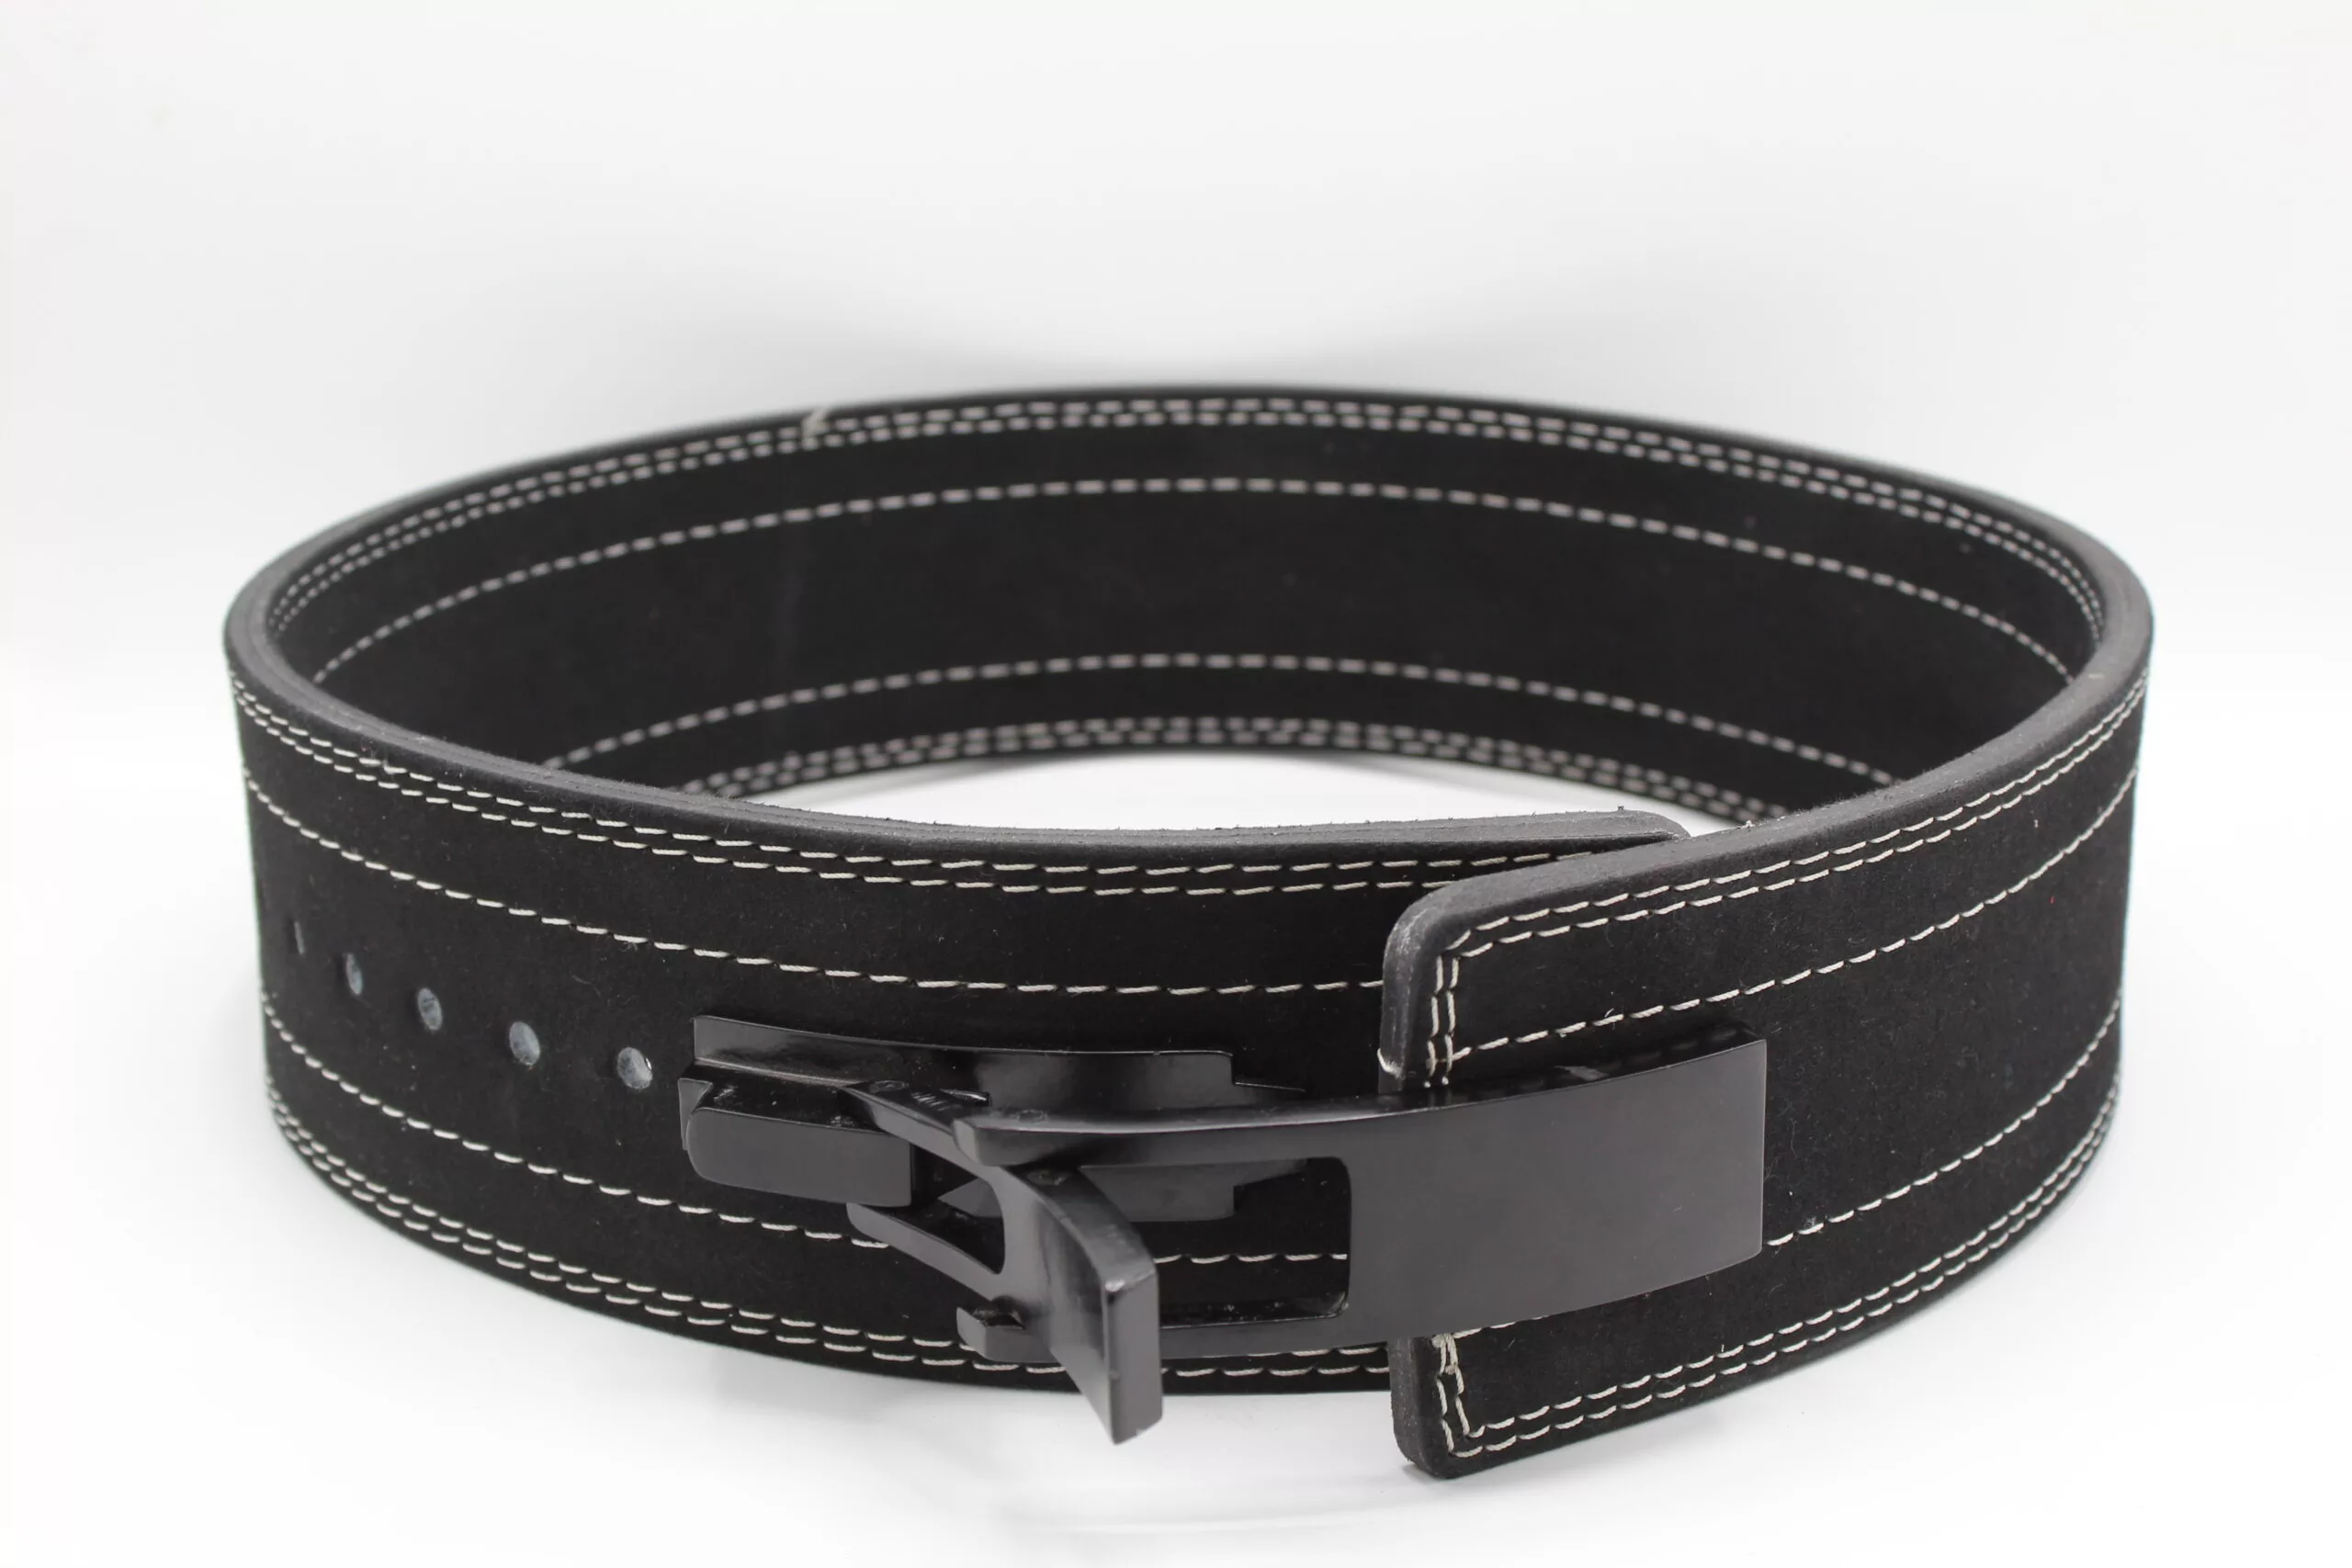 GENGHIS LEVER POWERLIFTING BELT / Weightlifting Lever Belt Black white stitched